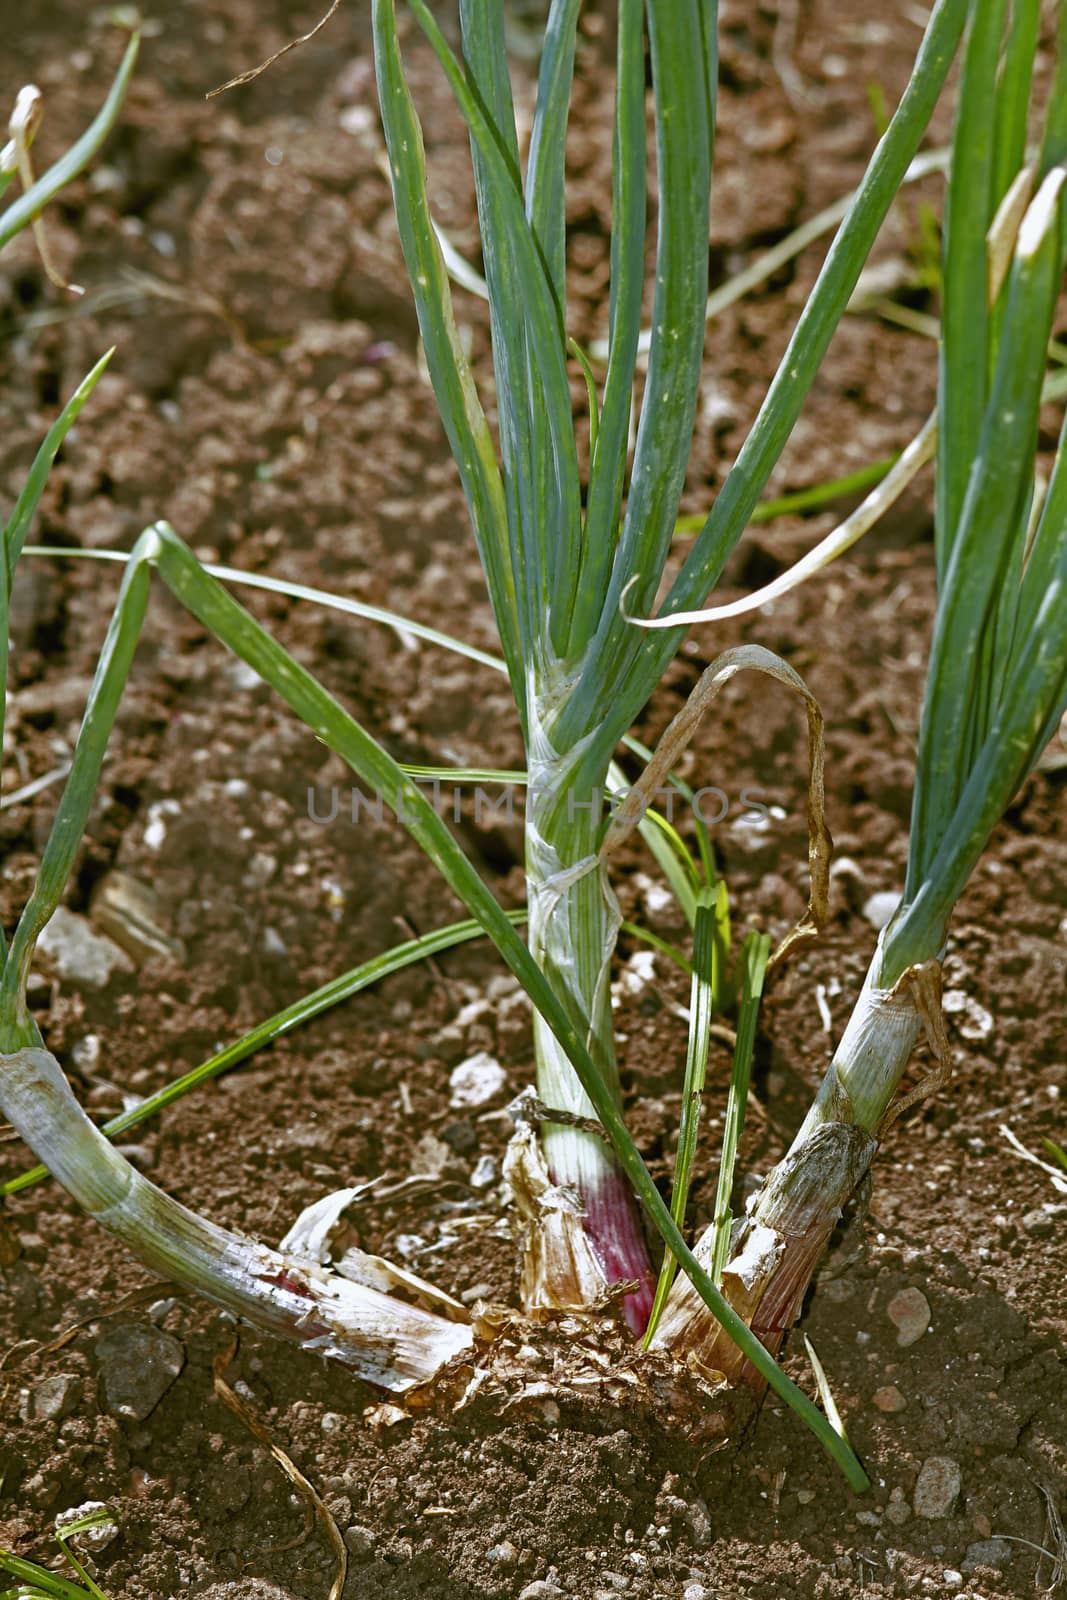 Field of Onion, Allium cepa. The onion also known as the bulb onion or common onion, is used as a vegetable and is the most widely cultivated species of the genus Allium.